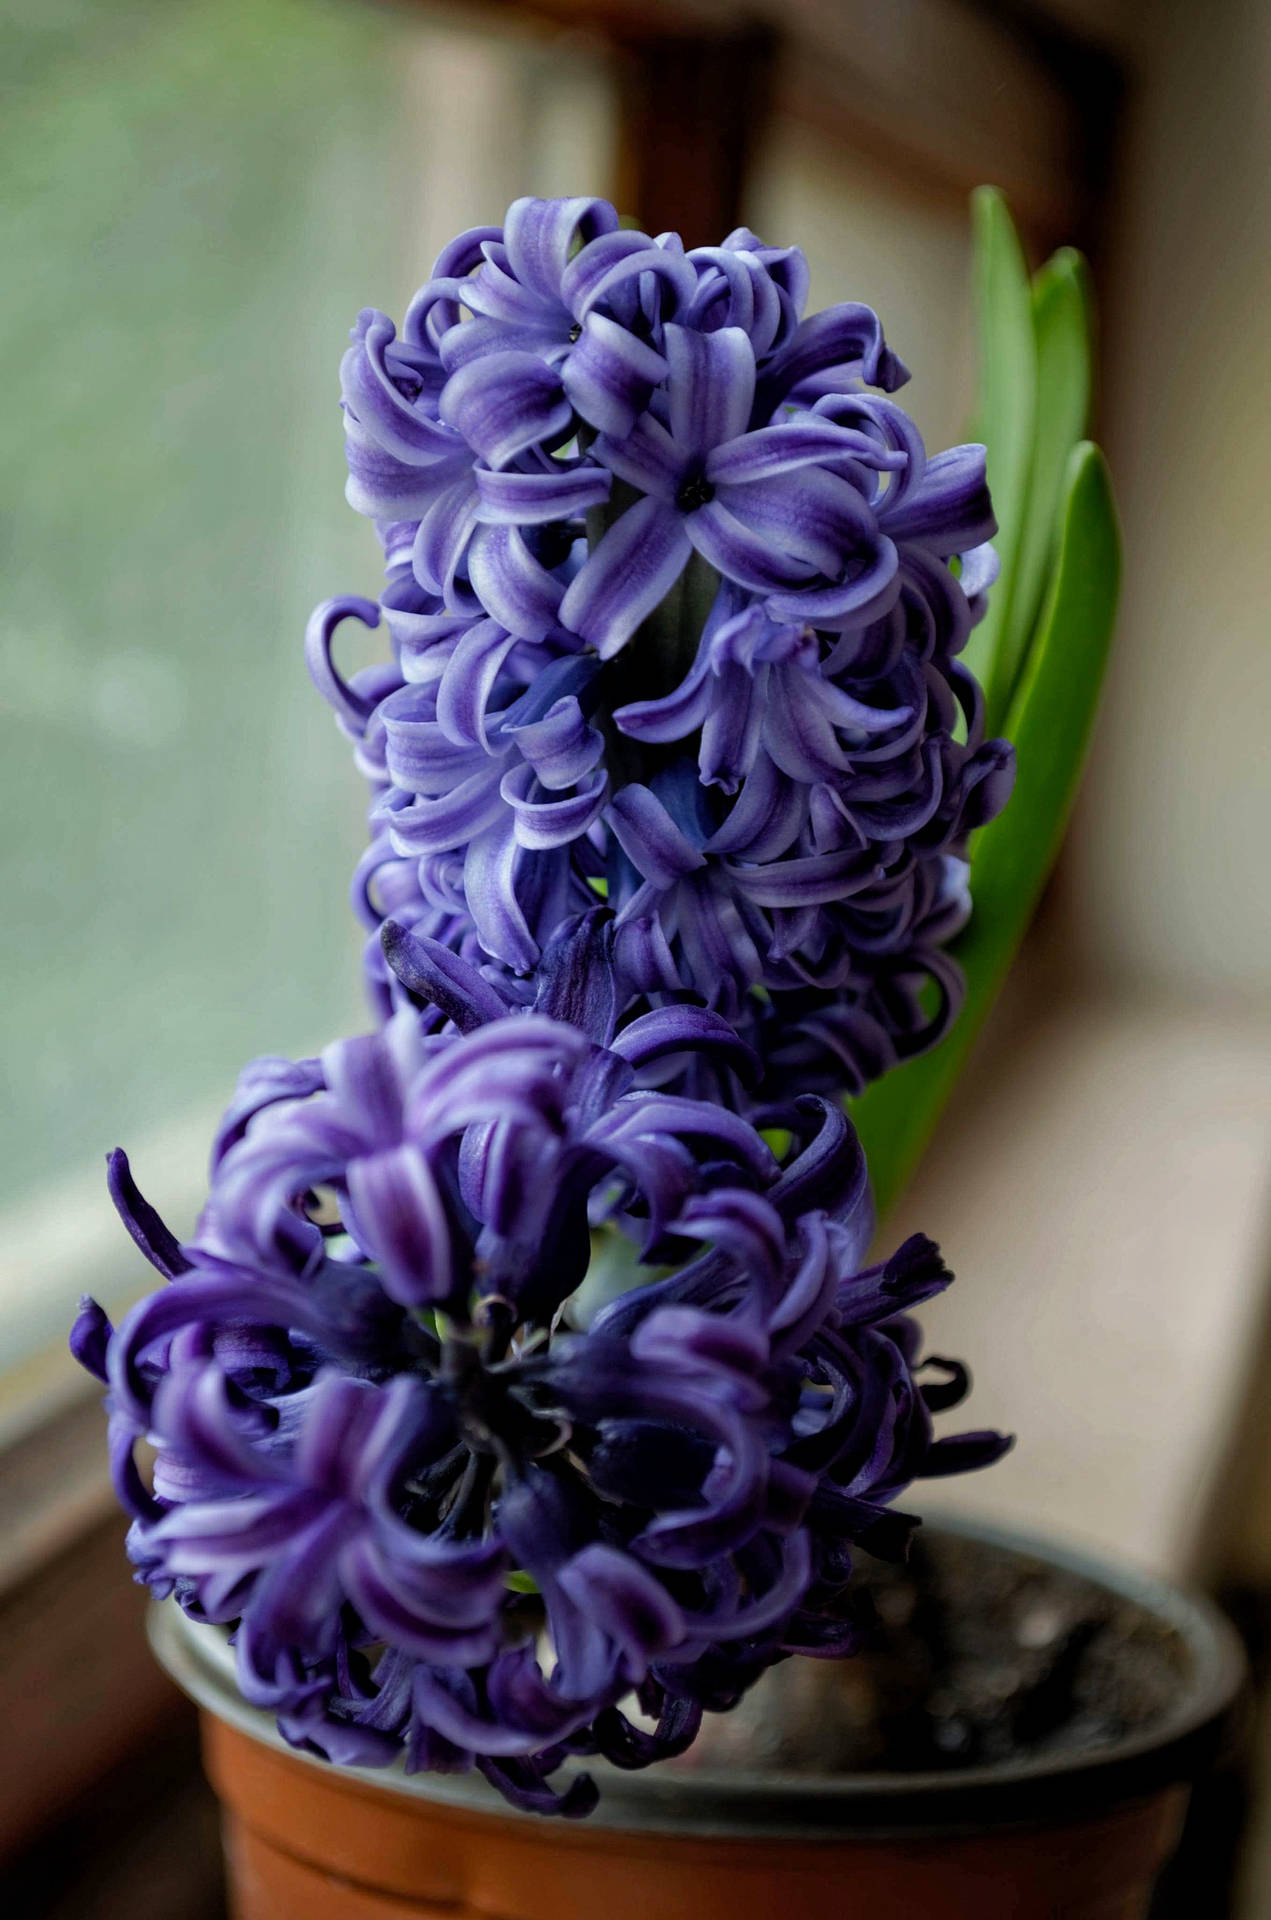 Potted Purple Hyacinth Flower